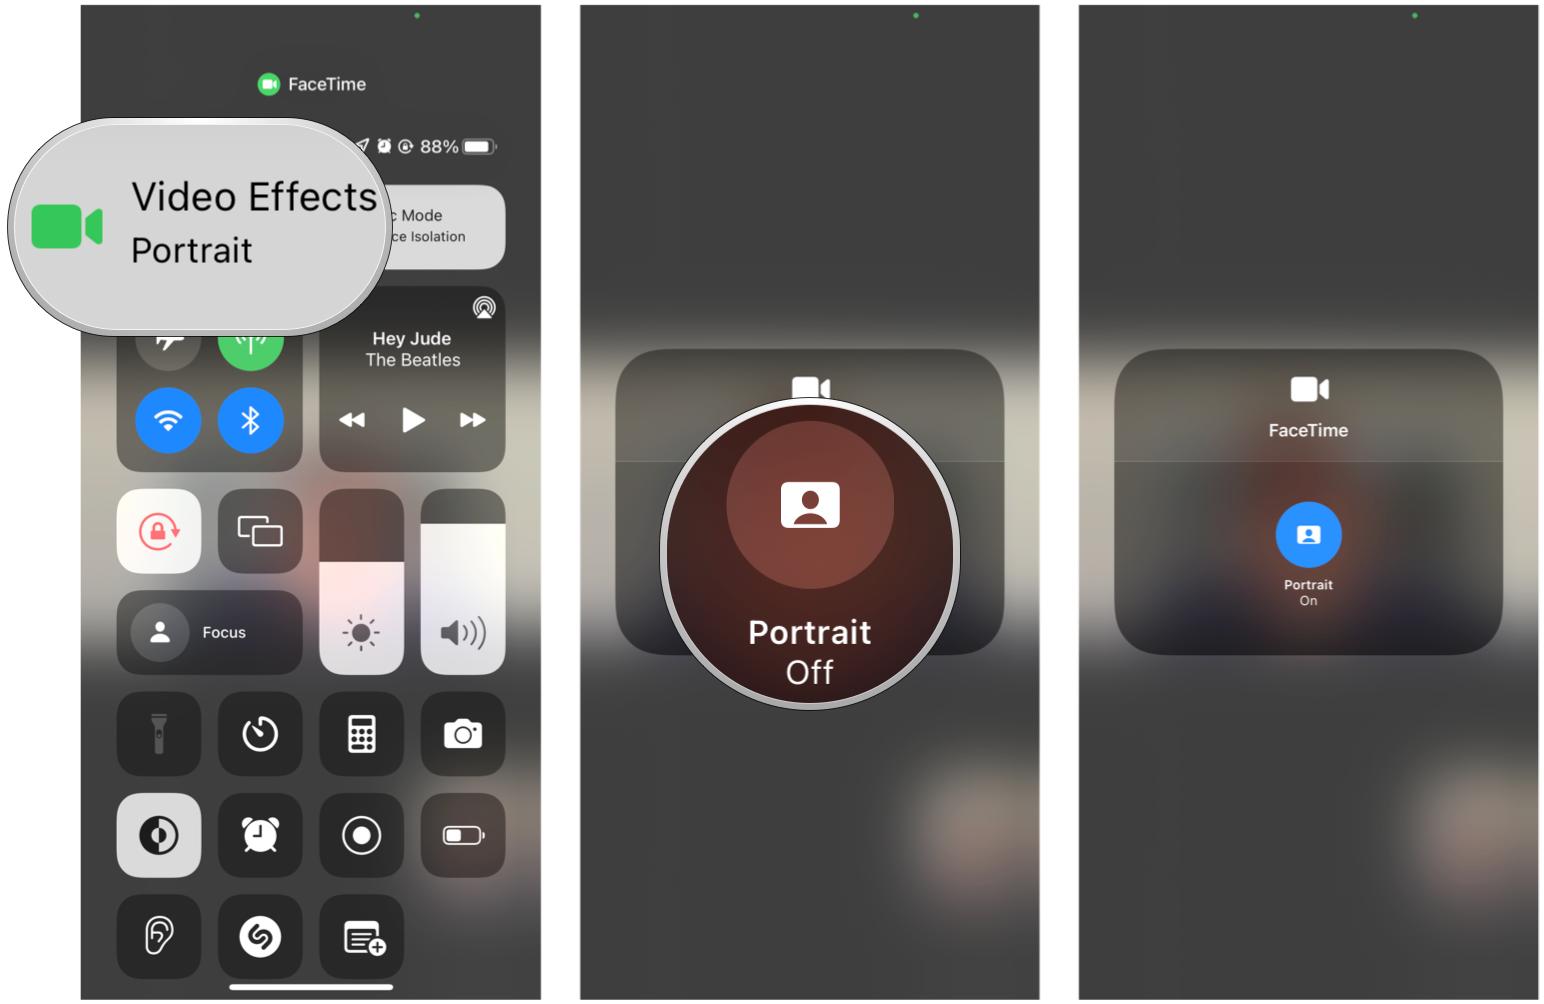 Use Control Center to toggle Portrait mode in FaceTime: Bring up Control Center, tap Video Effect in upper left corner, tap toggle for Portrait mode